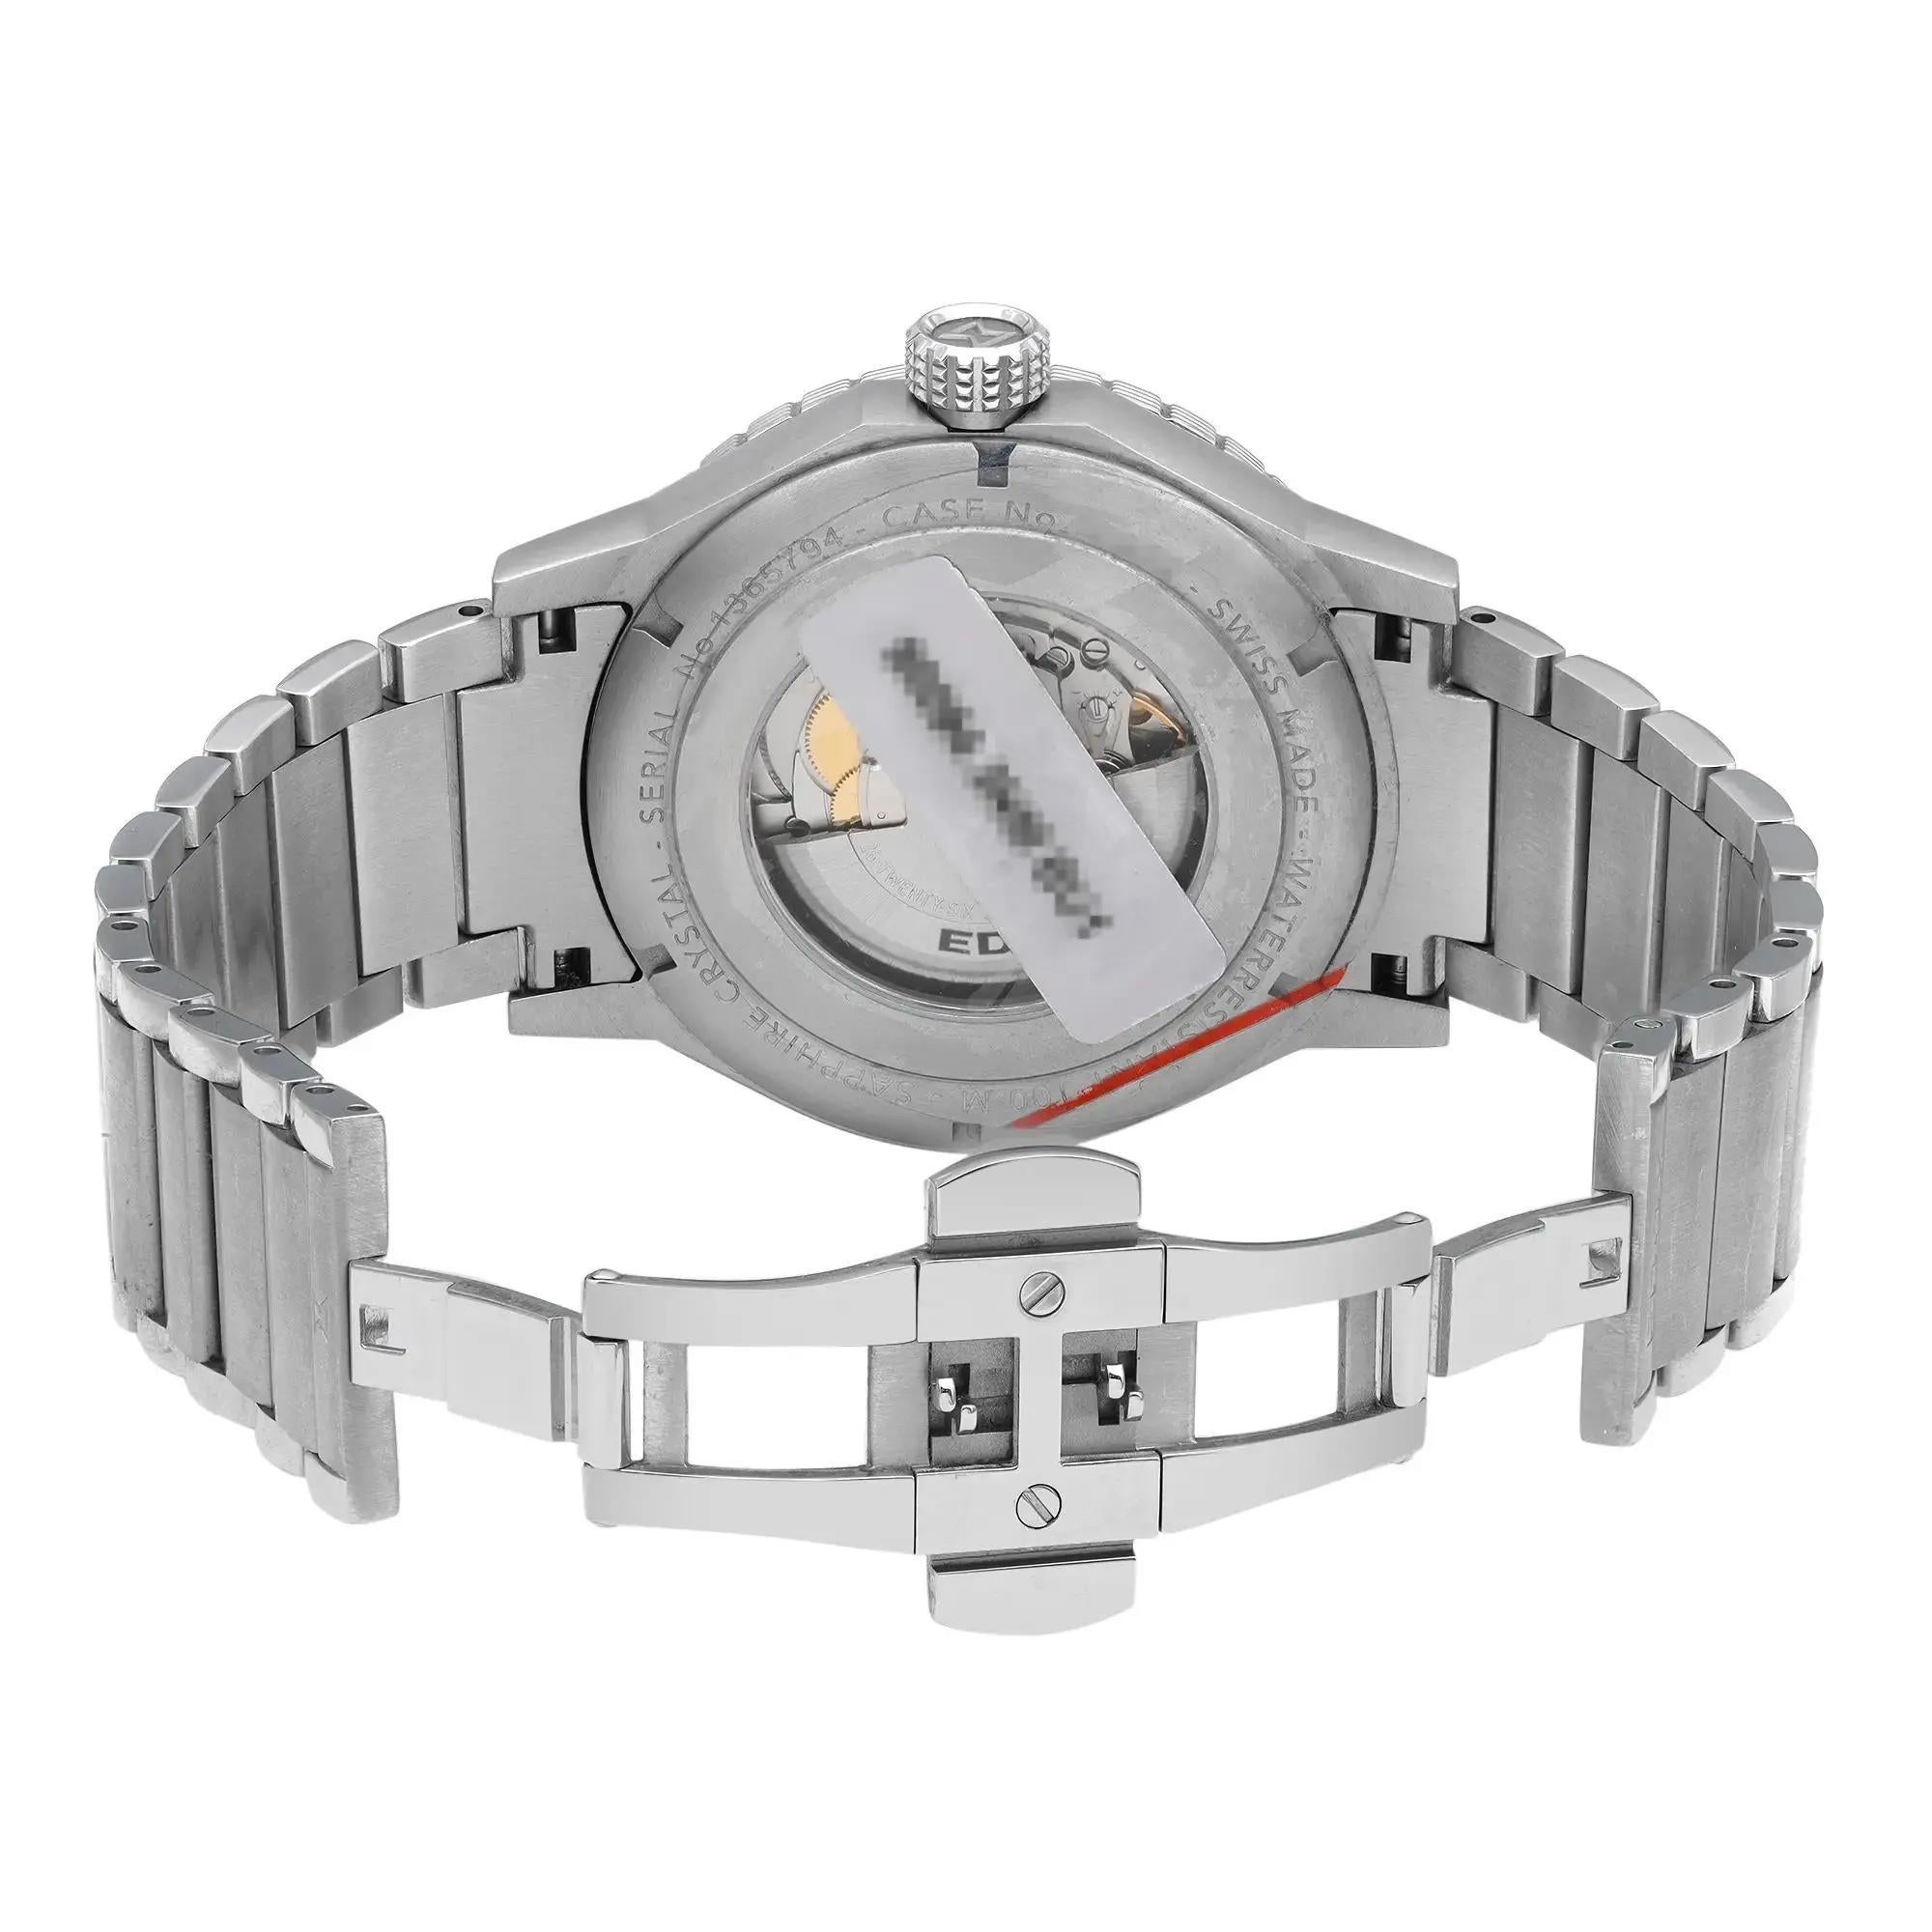 edox chronorally-1 stainless steel men's automatic watch